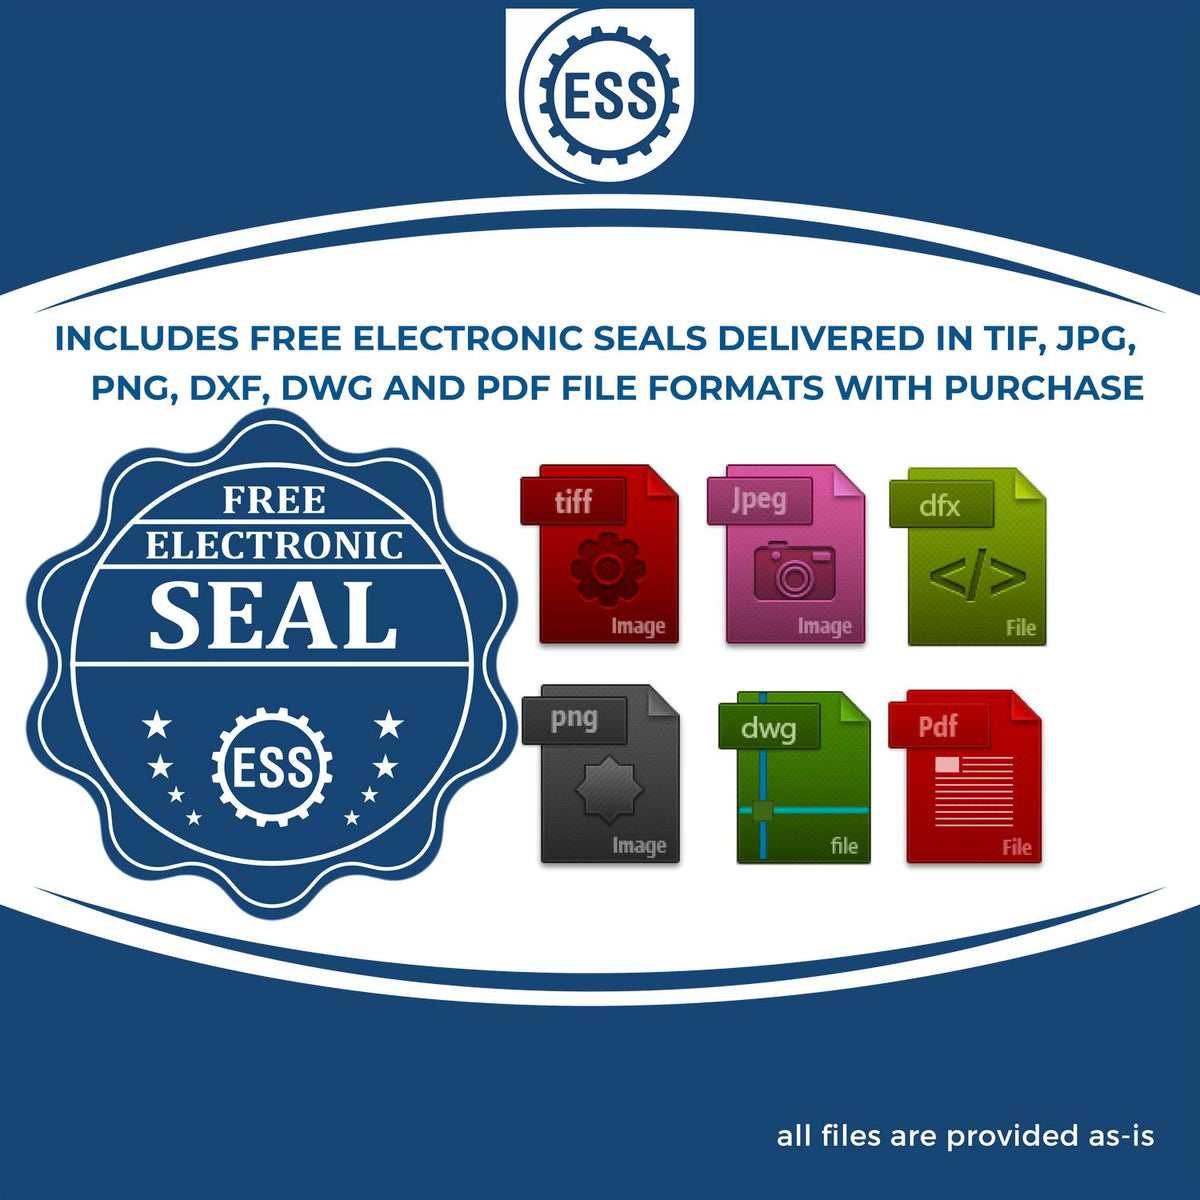 An infographic for the free electronic seal for the Gift Missouri Geologist Seal illustrating the different file type icons such as DXF, DWG, TIF, JPG and PNG.